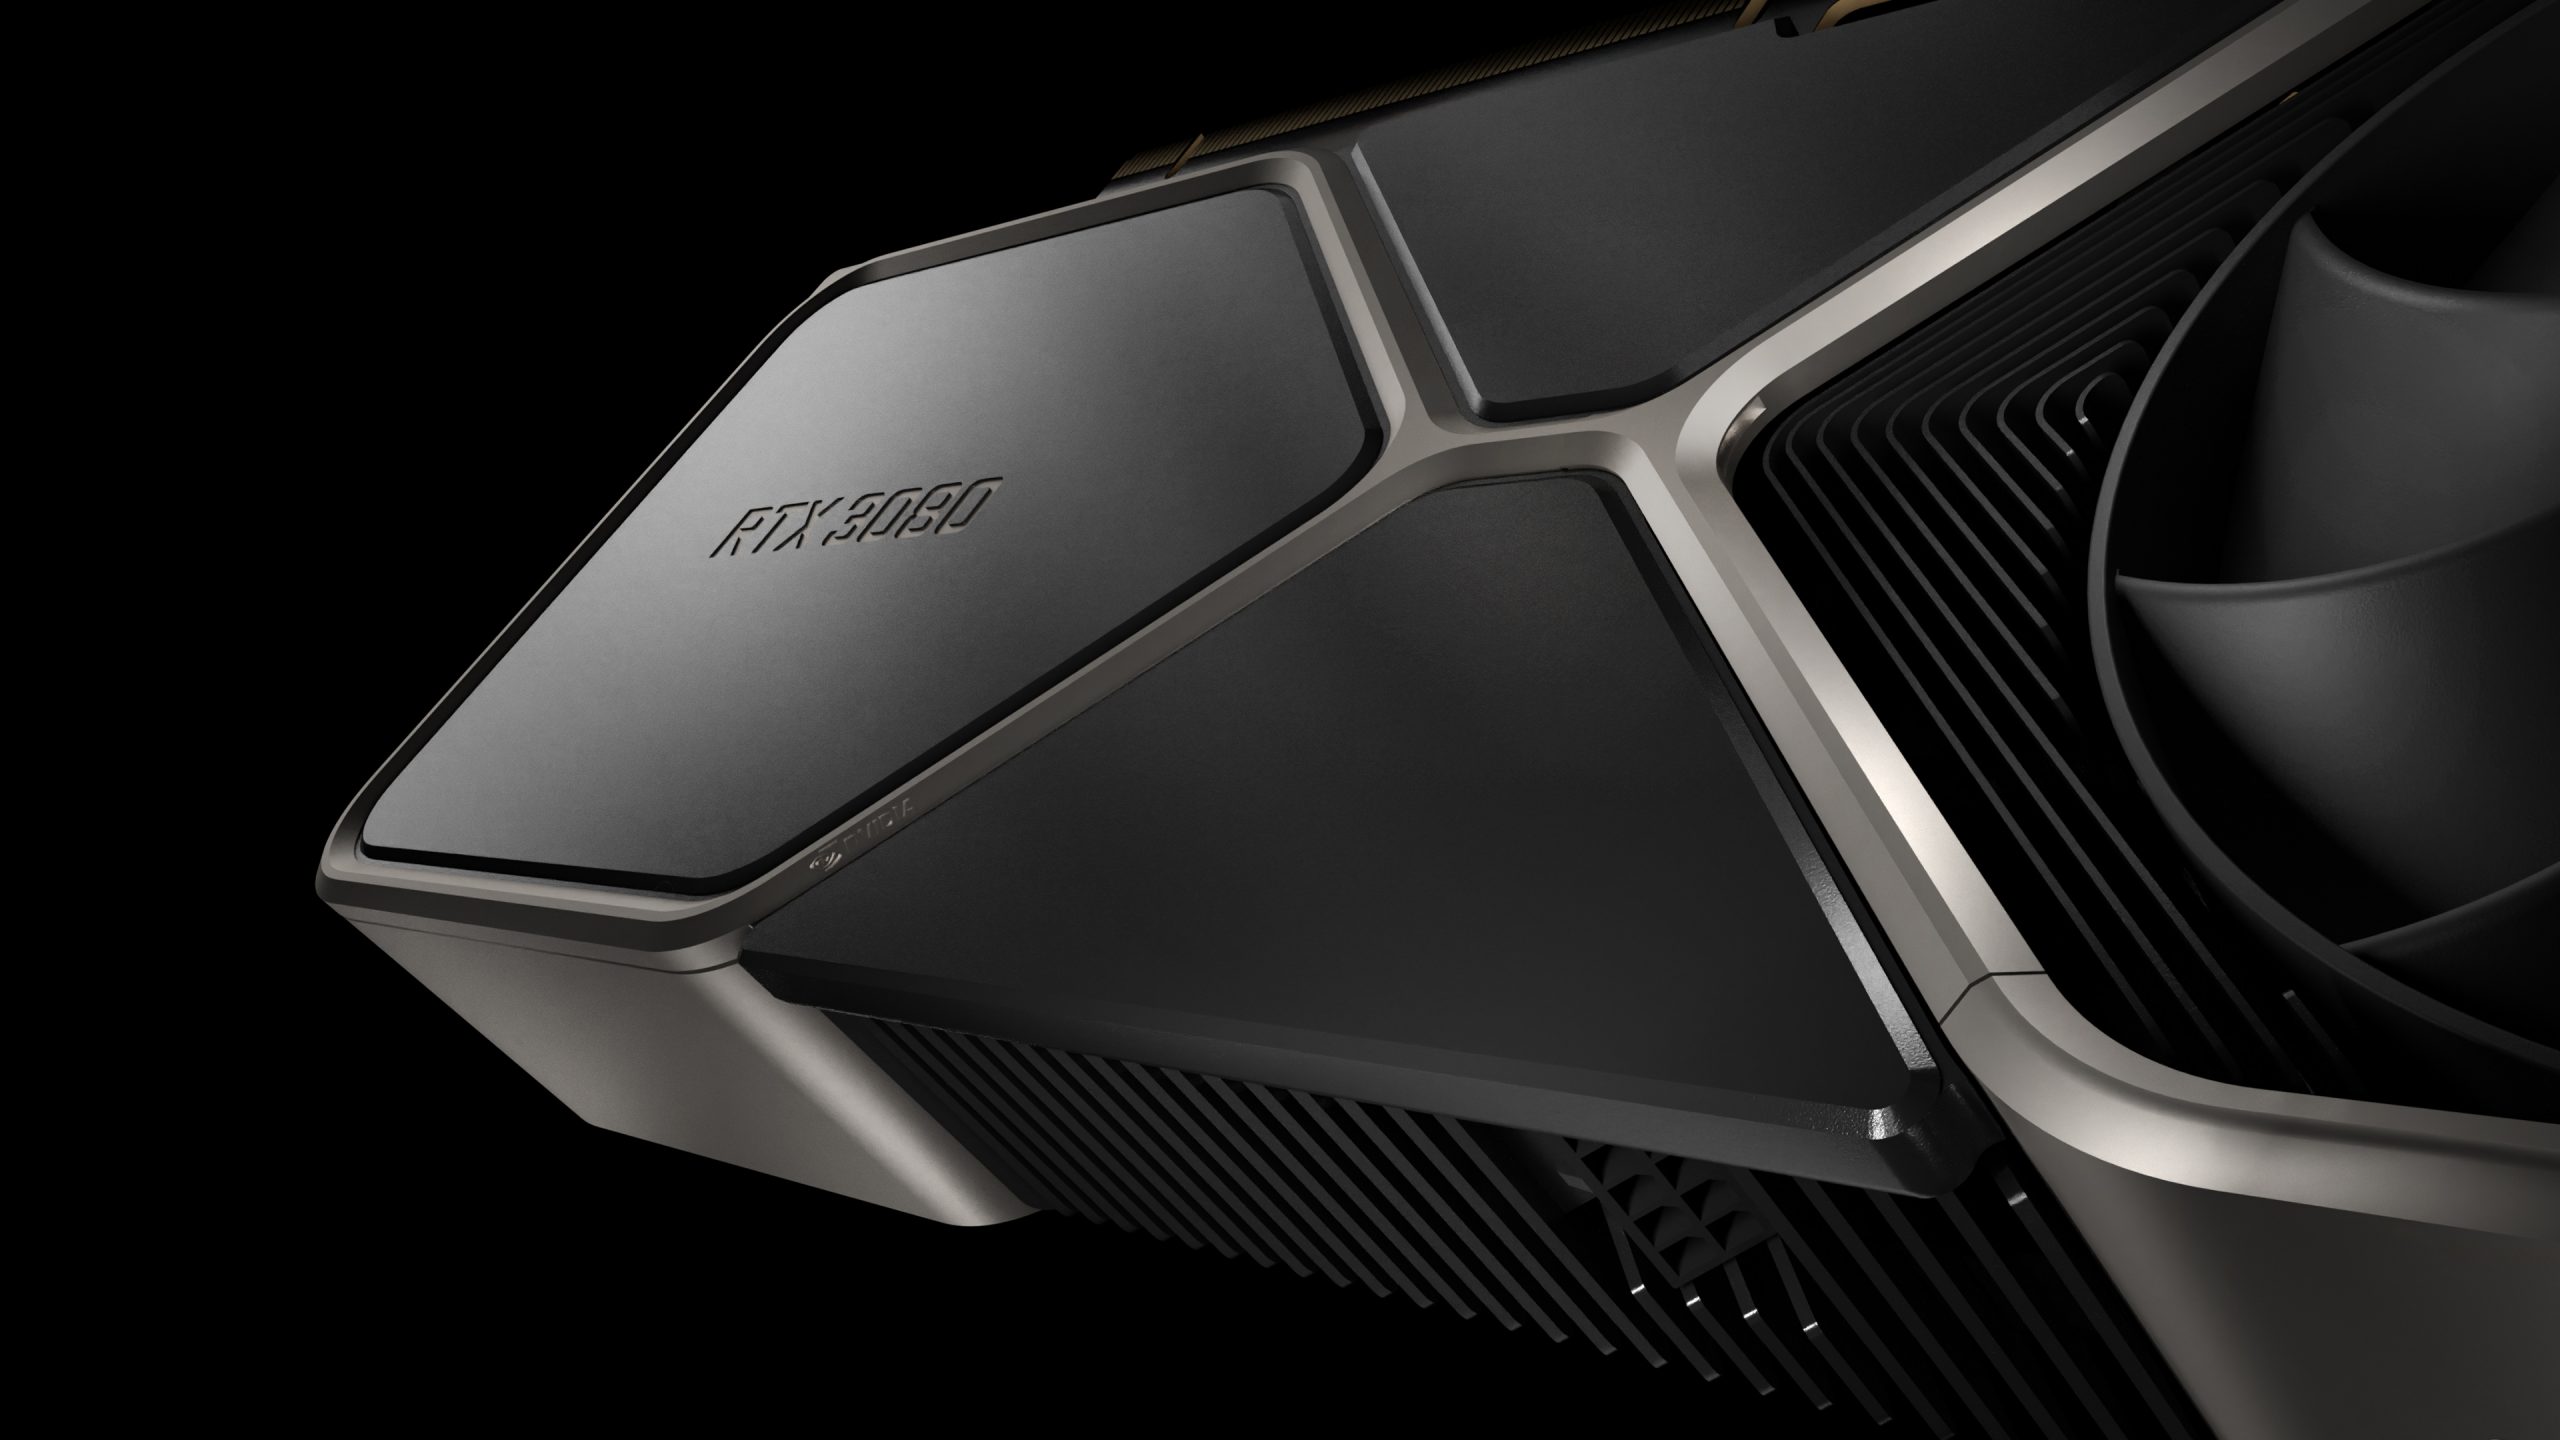 Nvidia's Upgraded Geforce Rtx 3080 12gb Could Be Available For Preorder Today